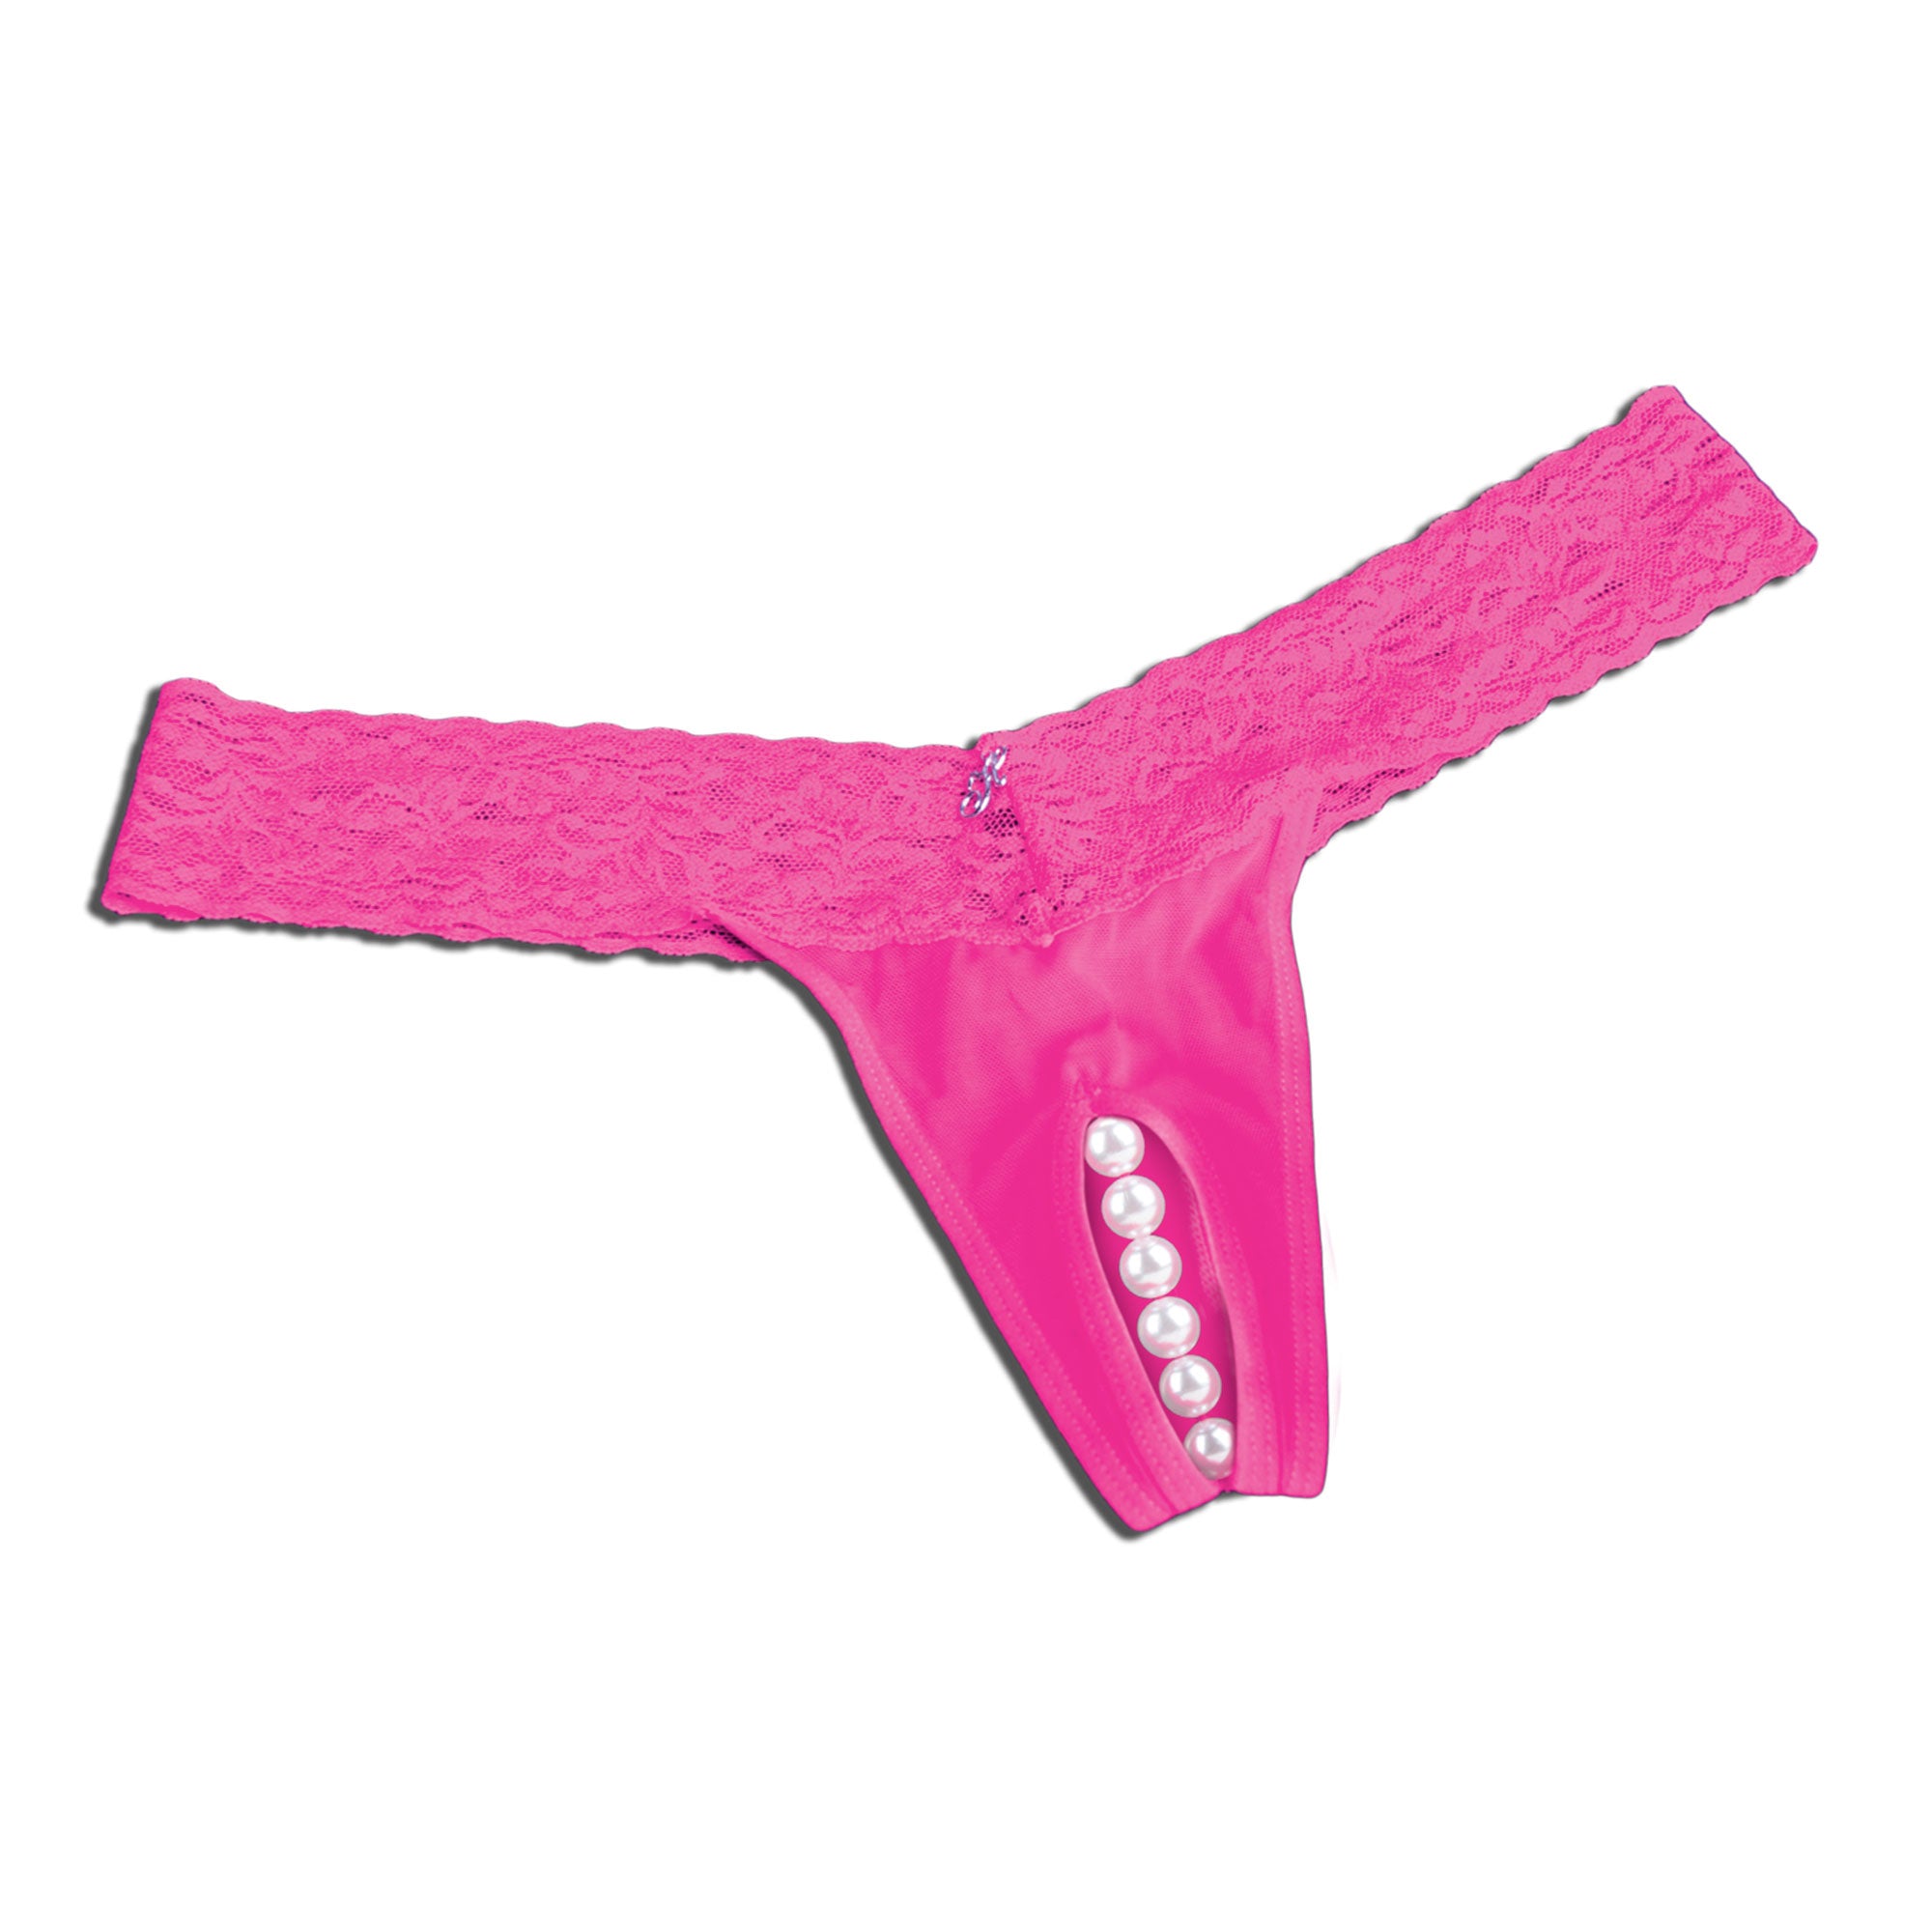 Hustler Crotchless Pleasure Panties with Pearl Beads - Hot Pink